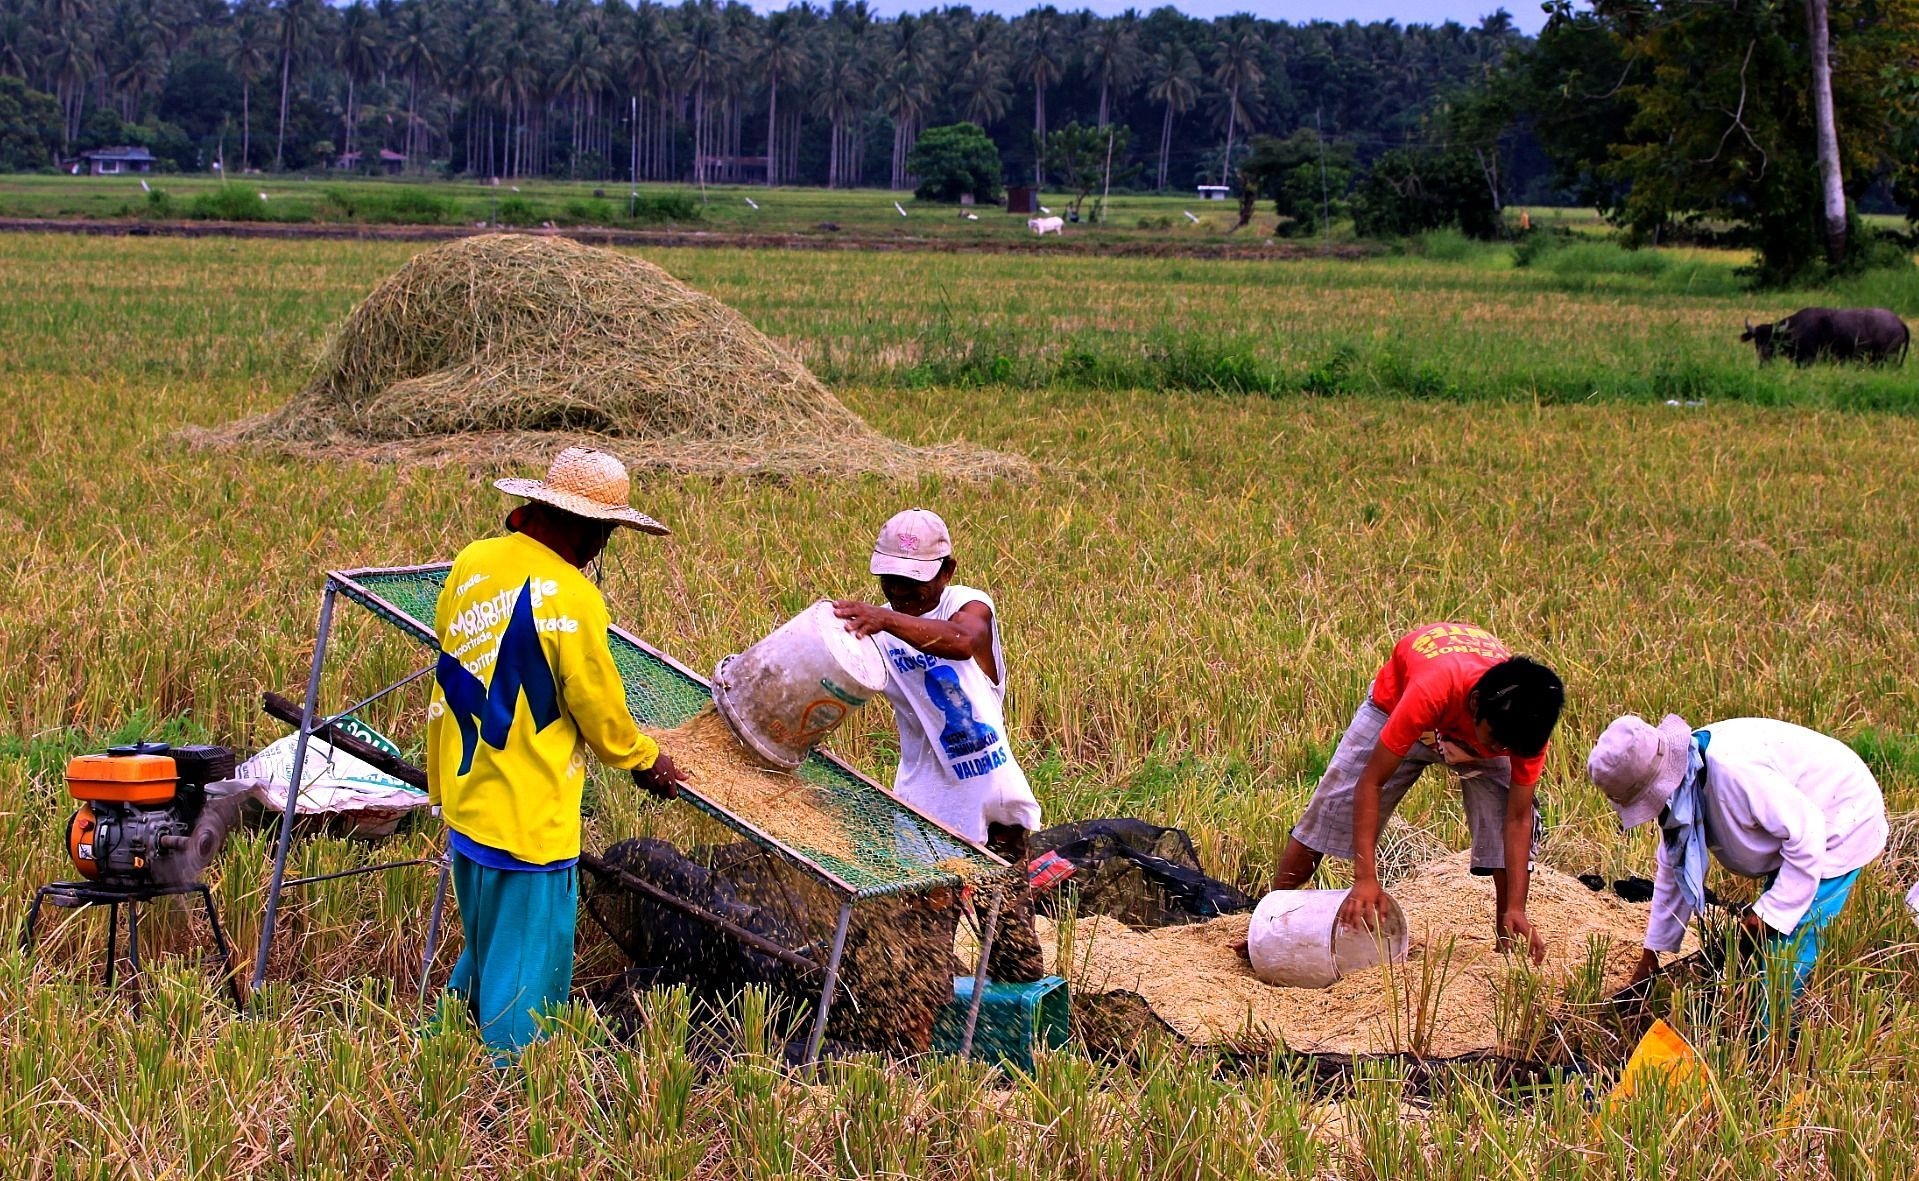 Rice tariffication law: Farmers worry; lawmakers wary